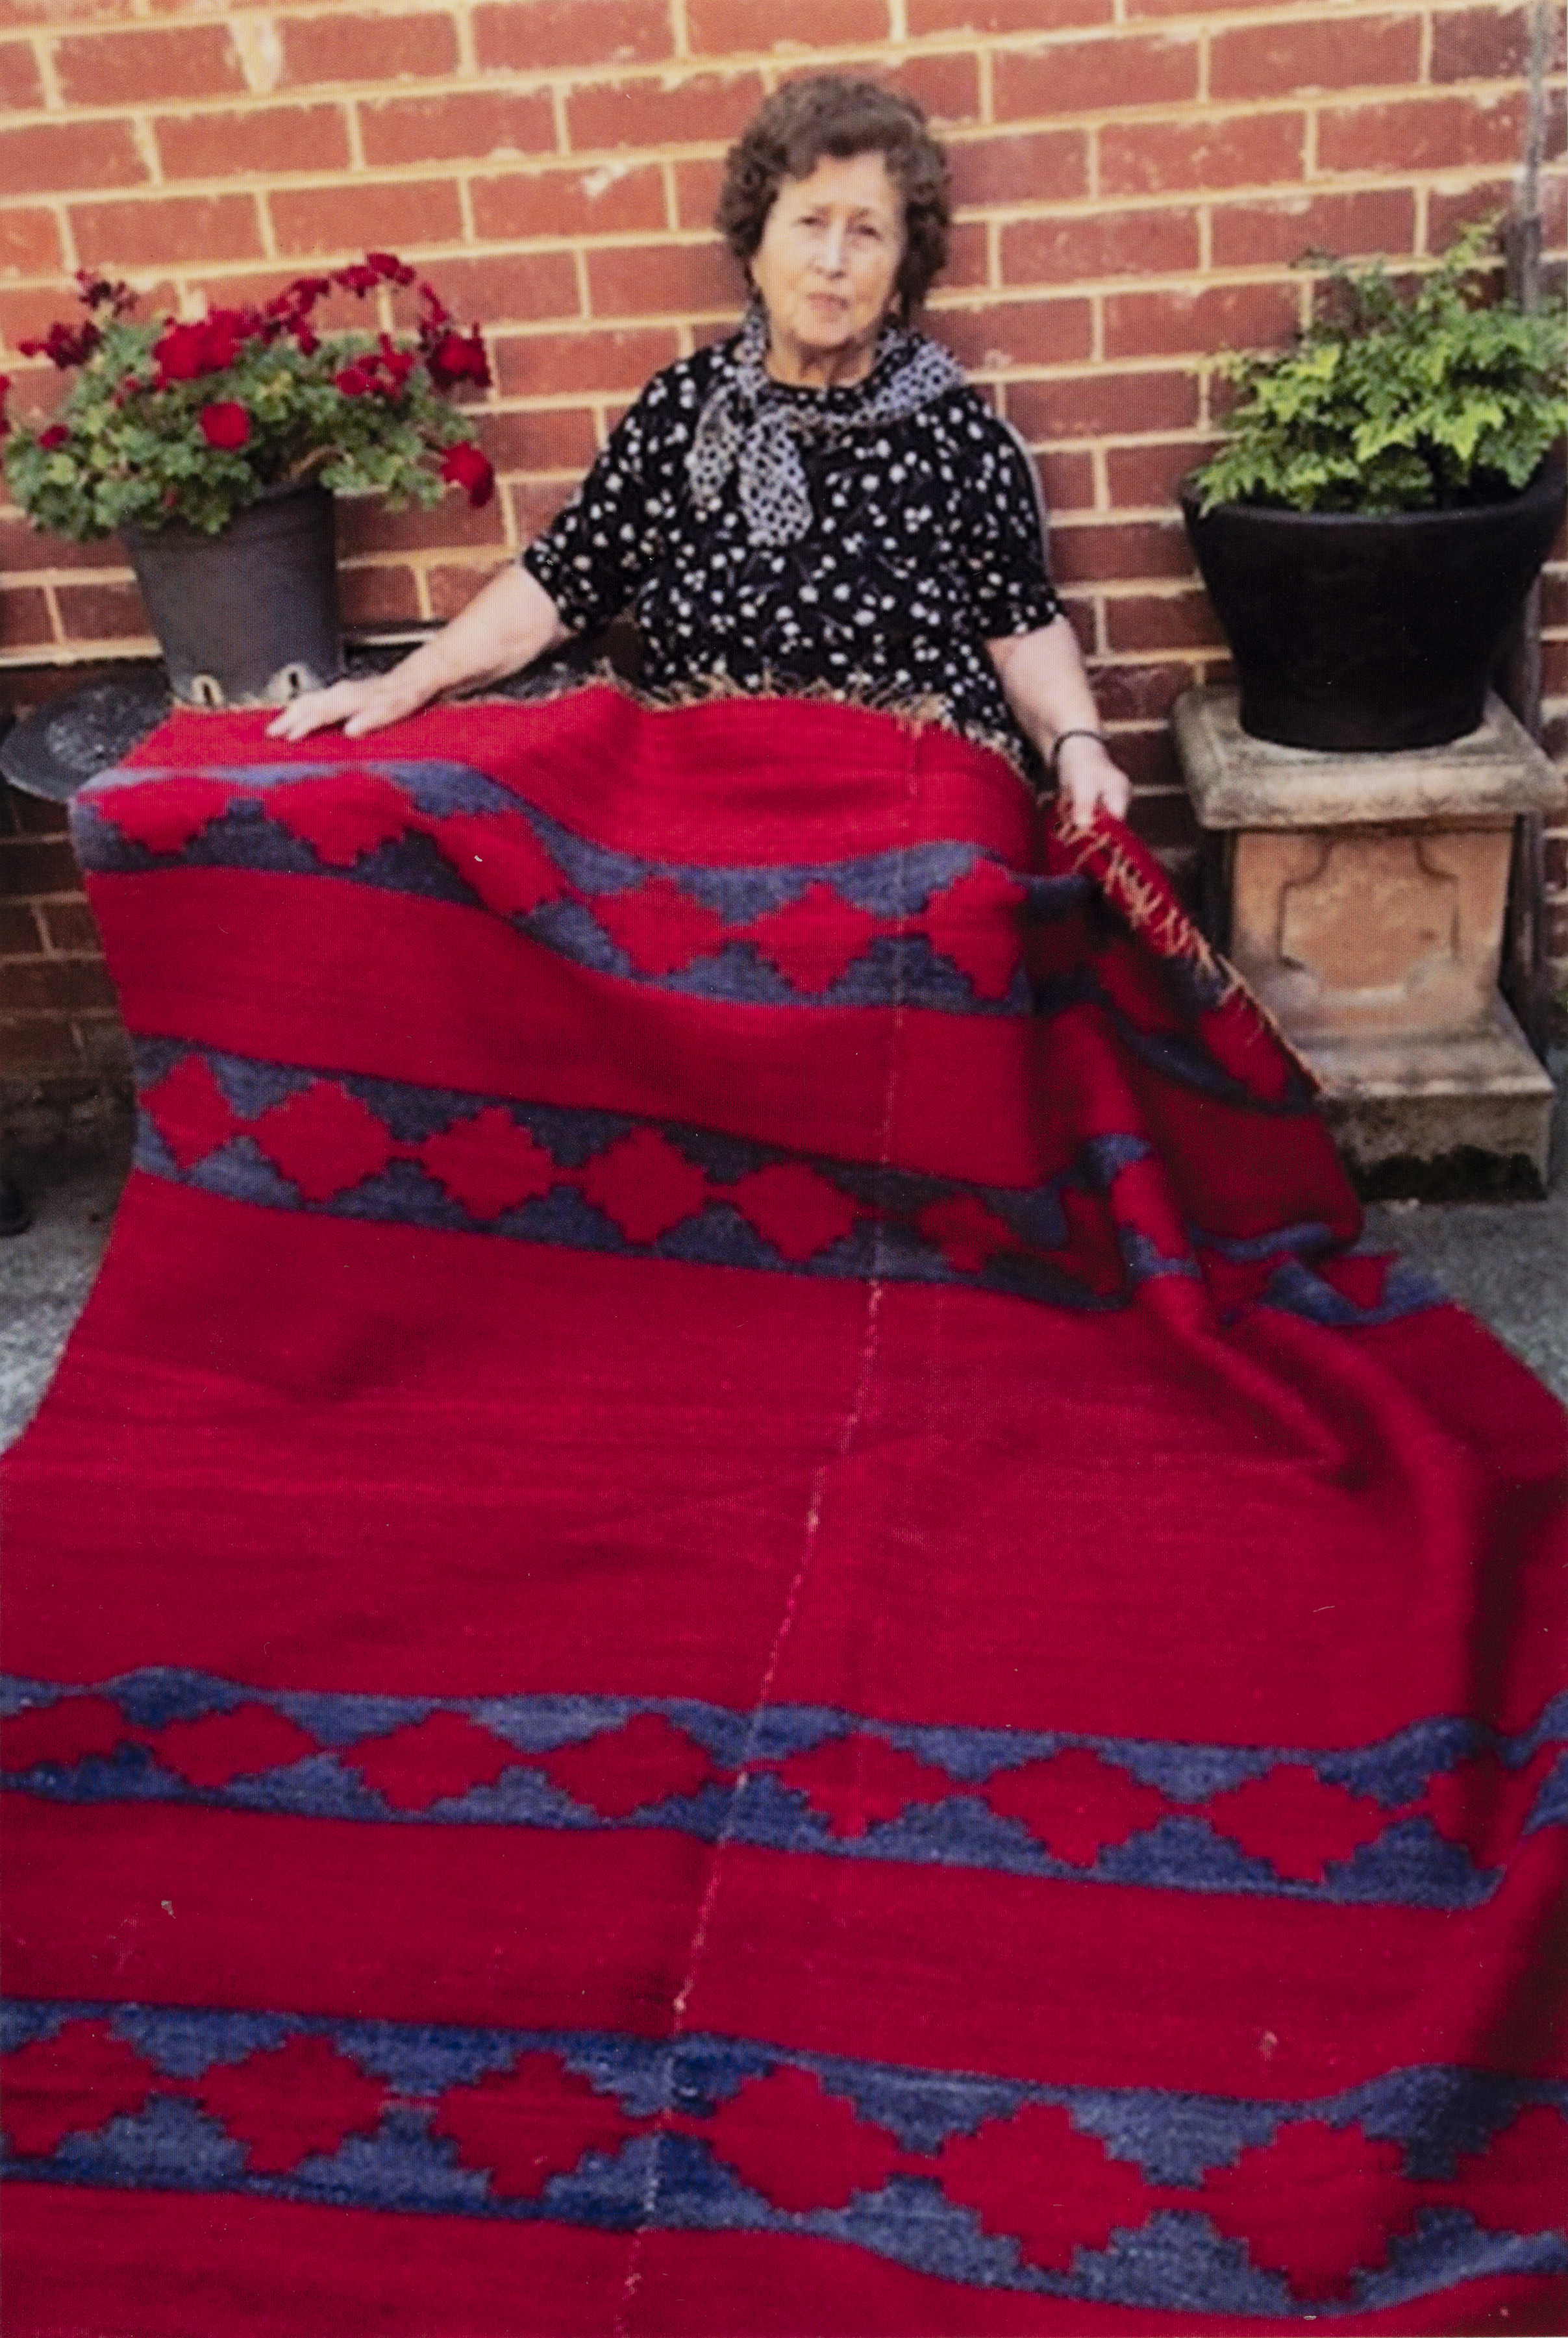 A woman holding a red and blue blanket